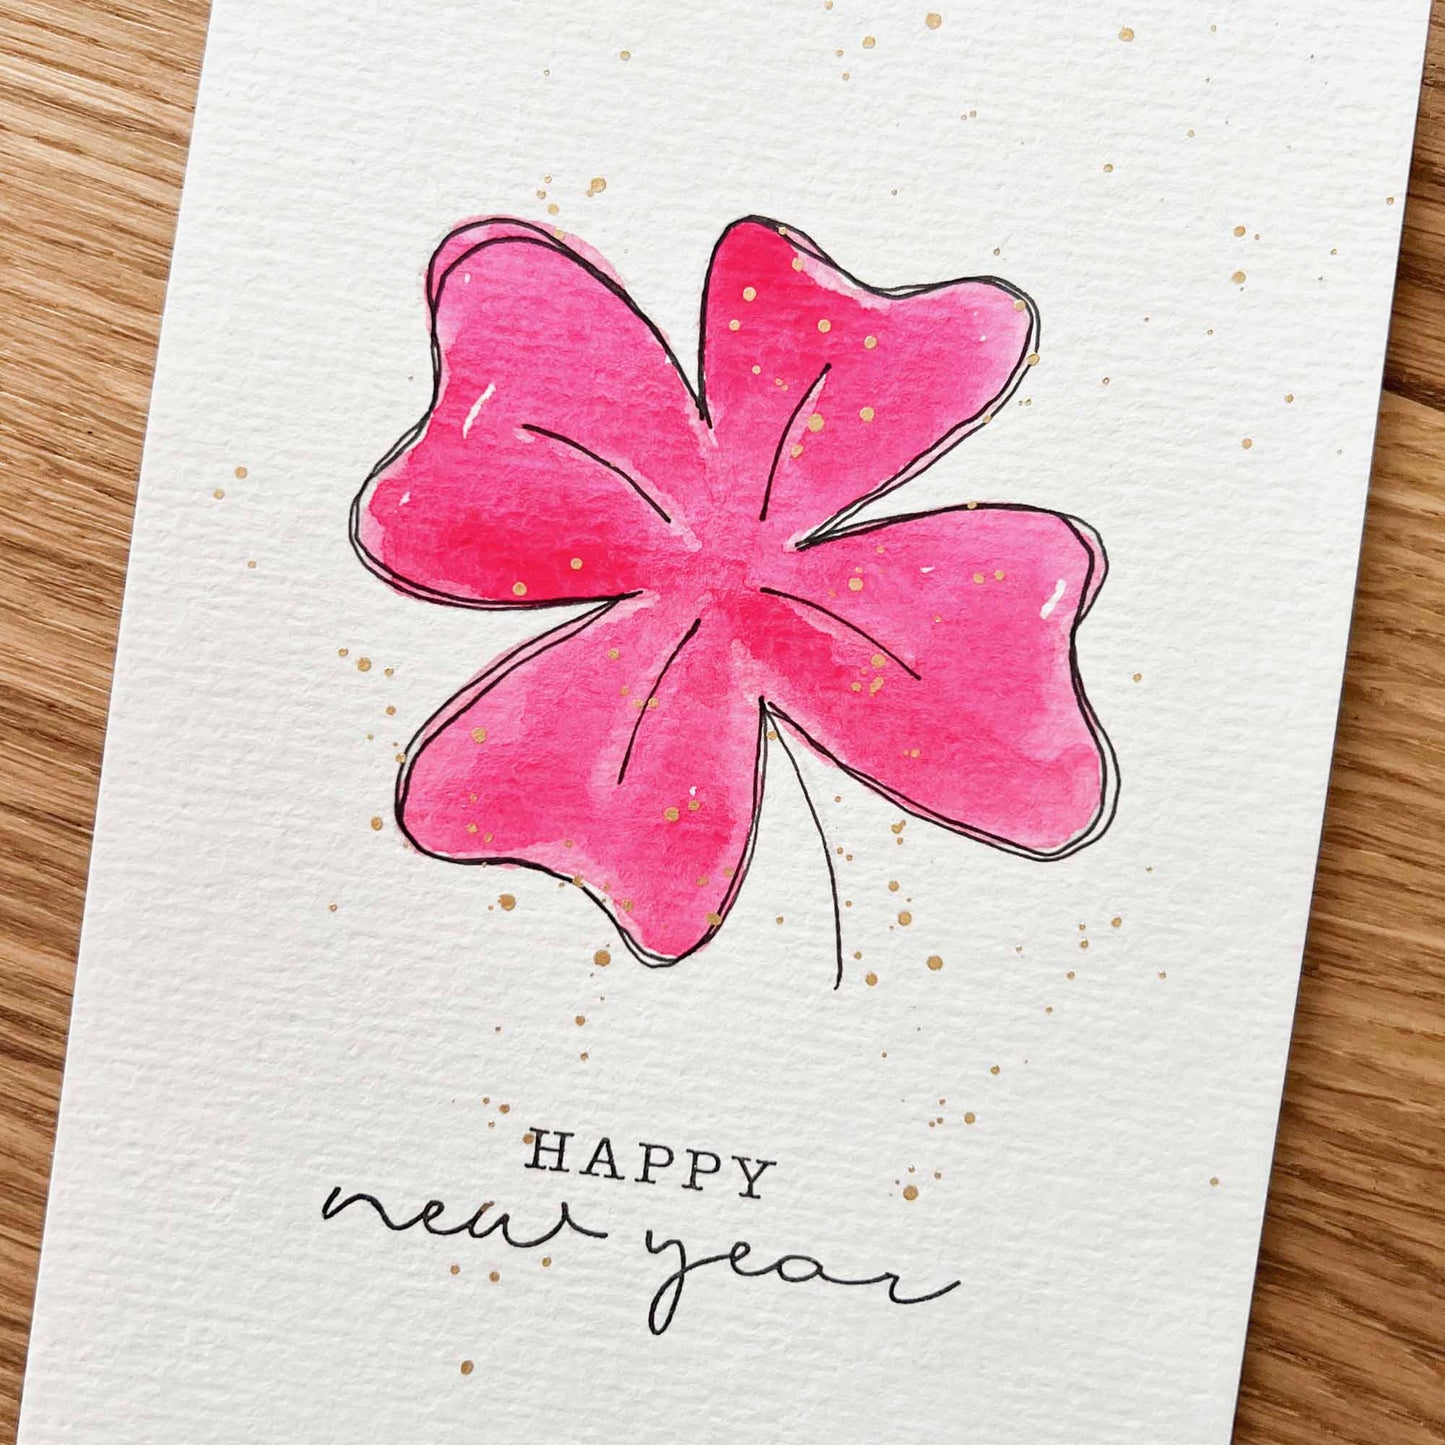 Stempel "Happy new year" - IN LOVE WITH PAPER